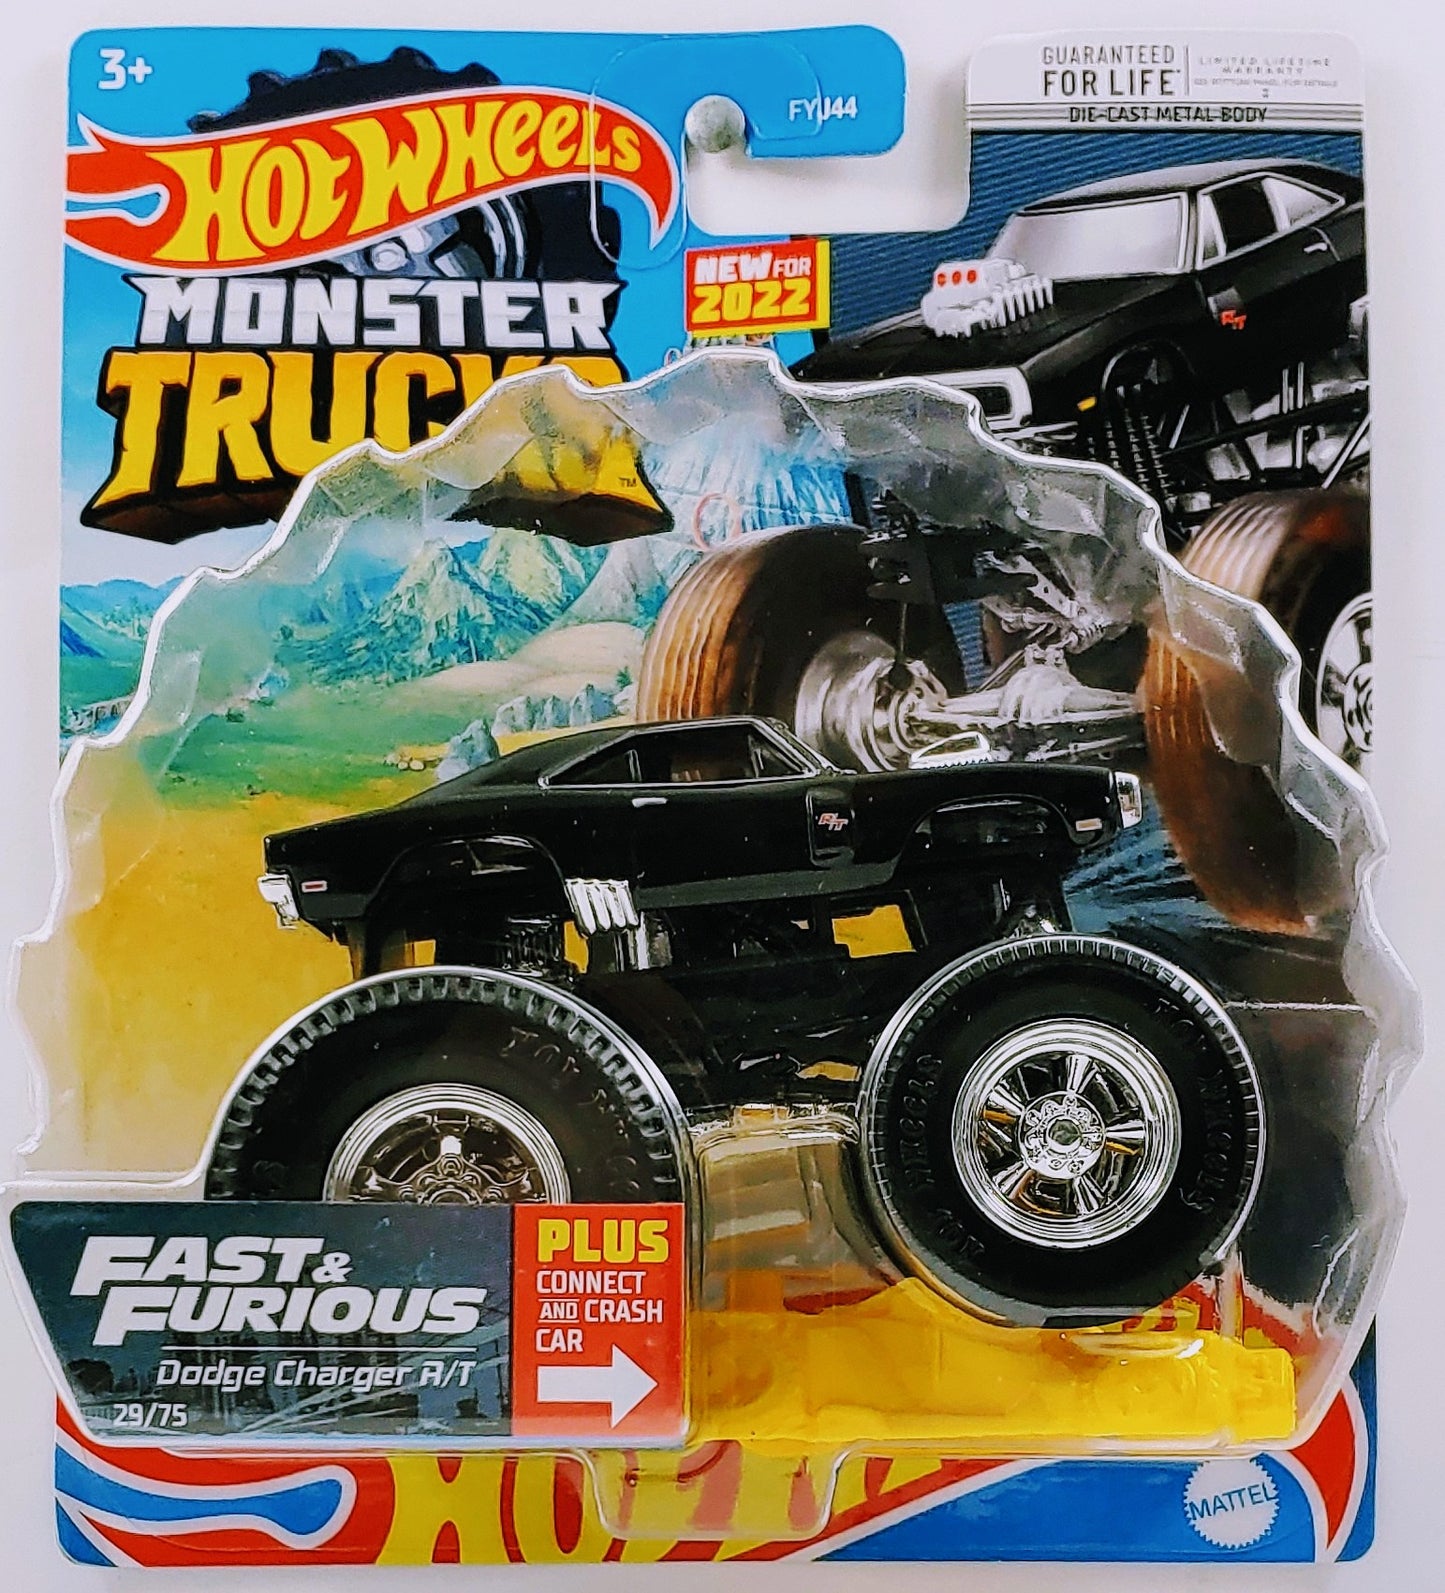 Hot Wheels 2022 - Monster Trucks 29/75 - New Models - Fast & Furious / Dodge Charger R/T - Black - Chrome Mag Wheels with Slicks - Includes FREE Connect and Crash Car